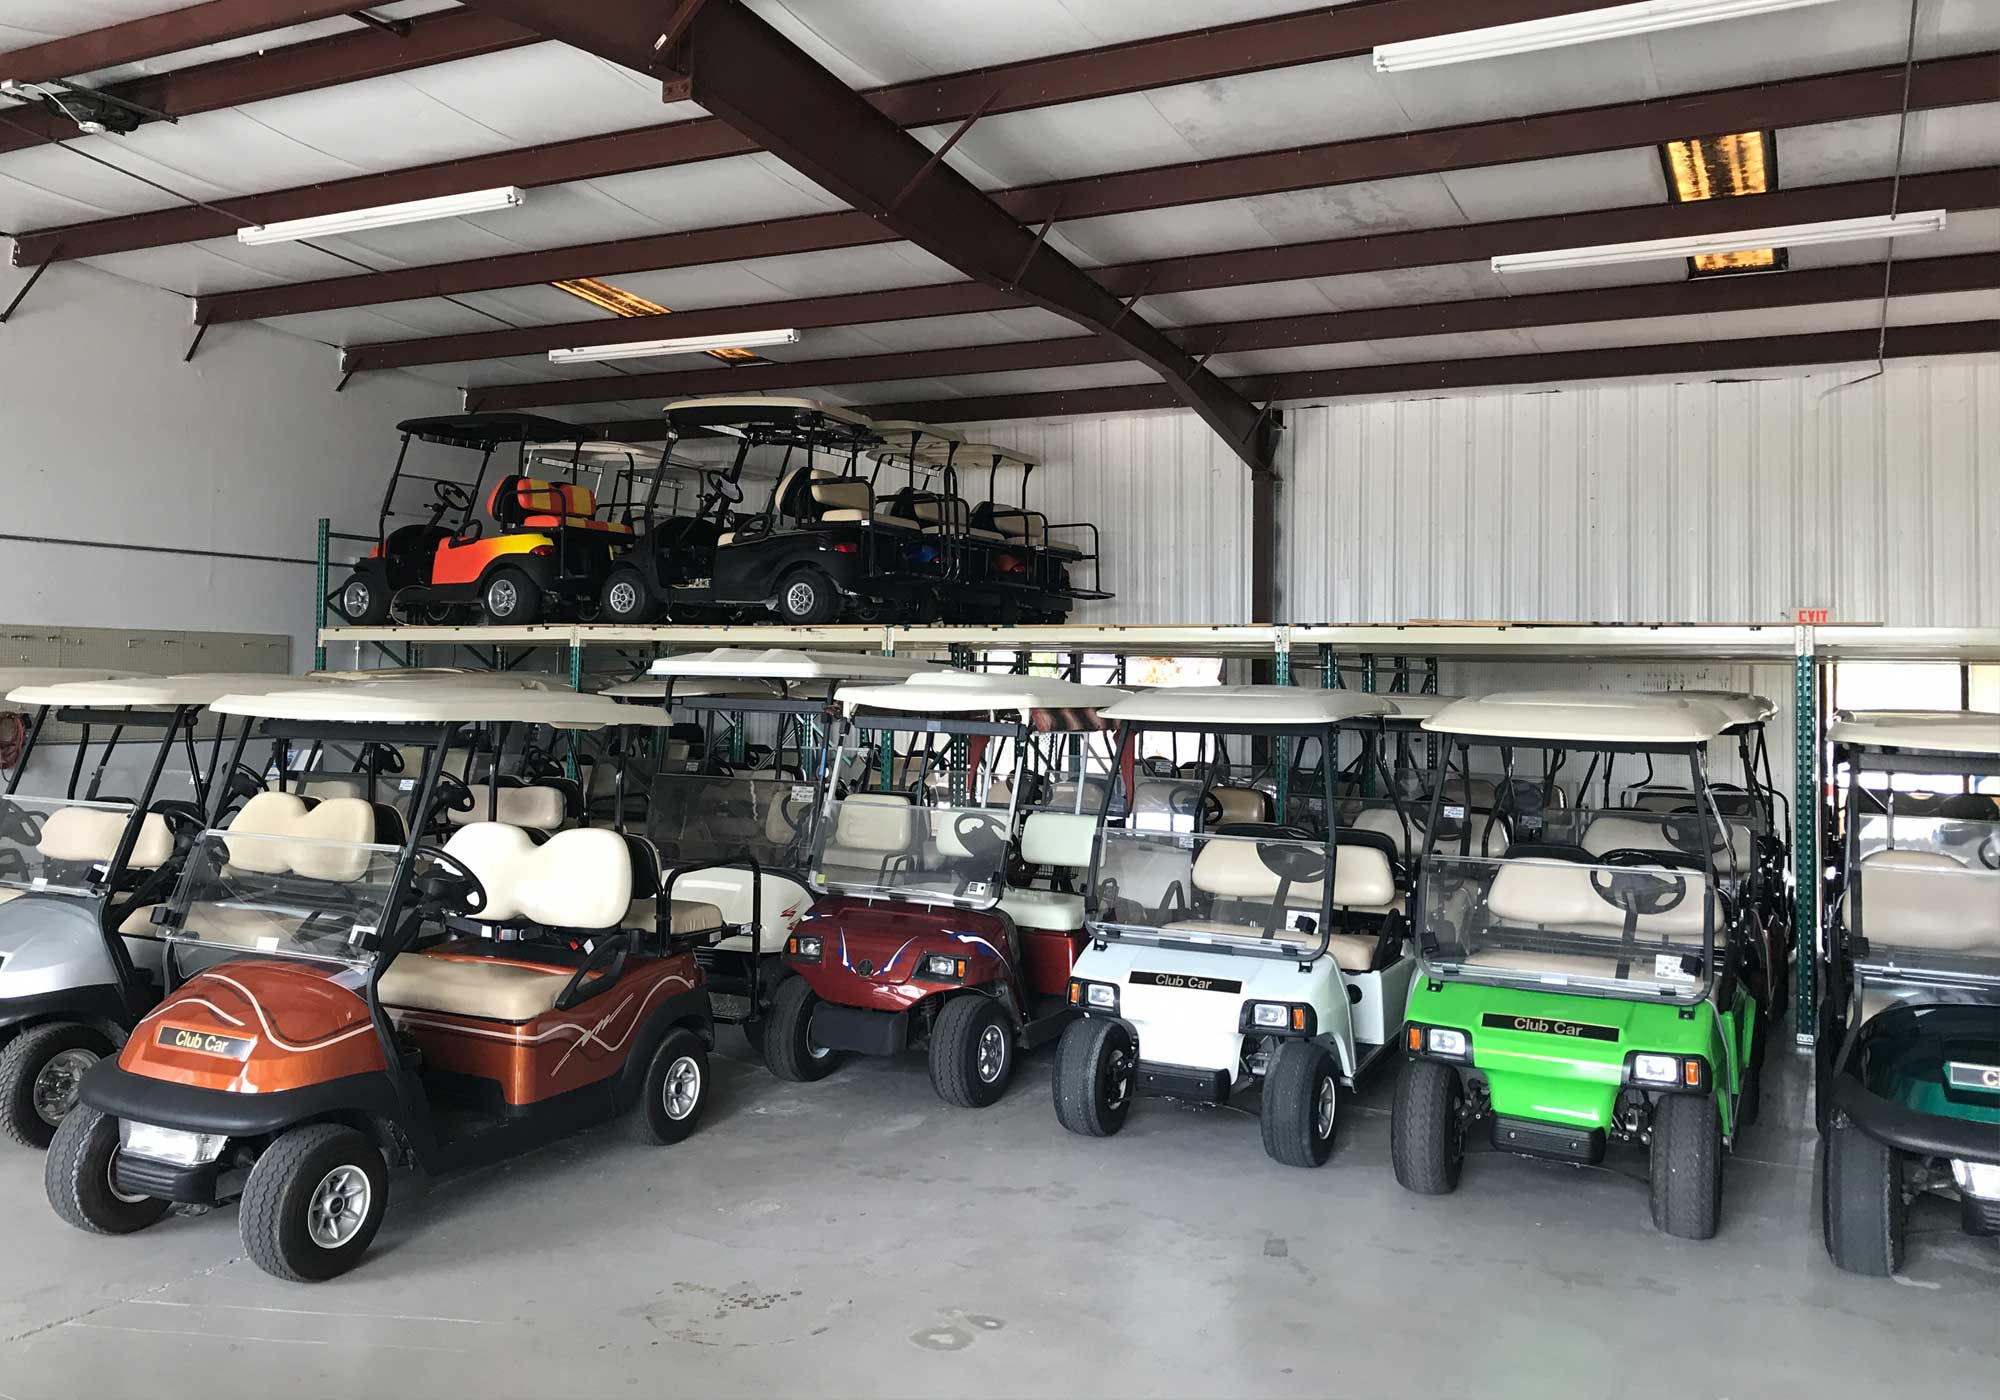 COMMERCIAL LEASING OF GOLF CARTS